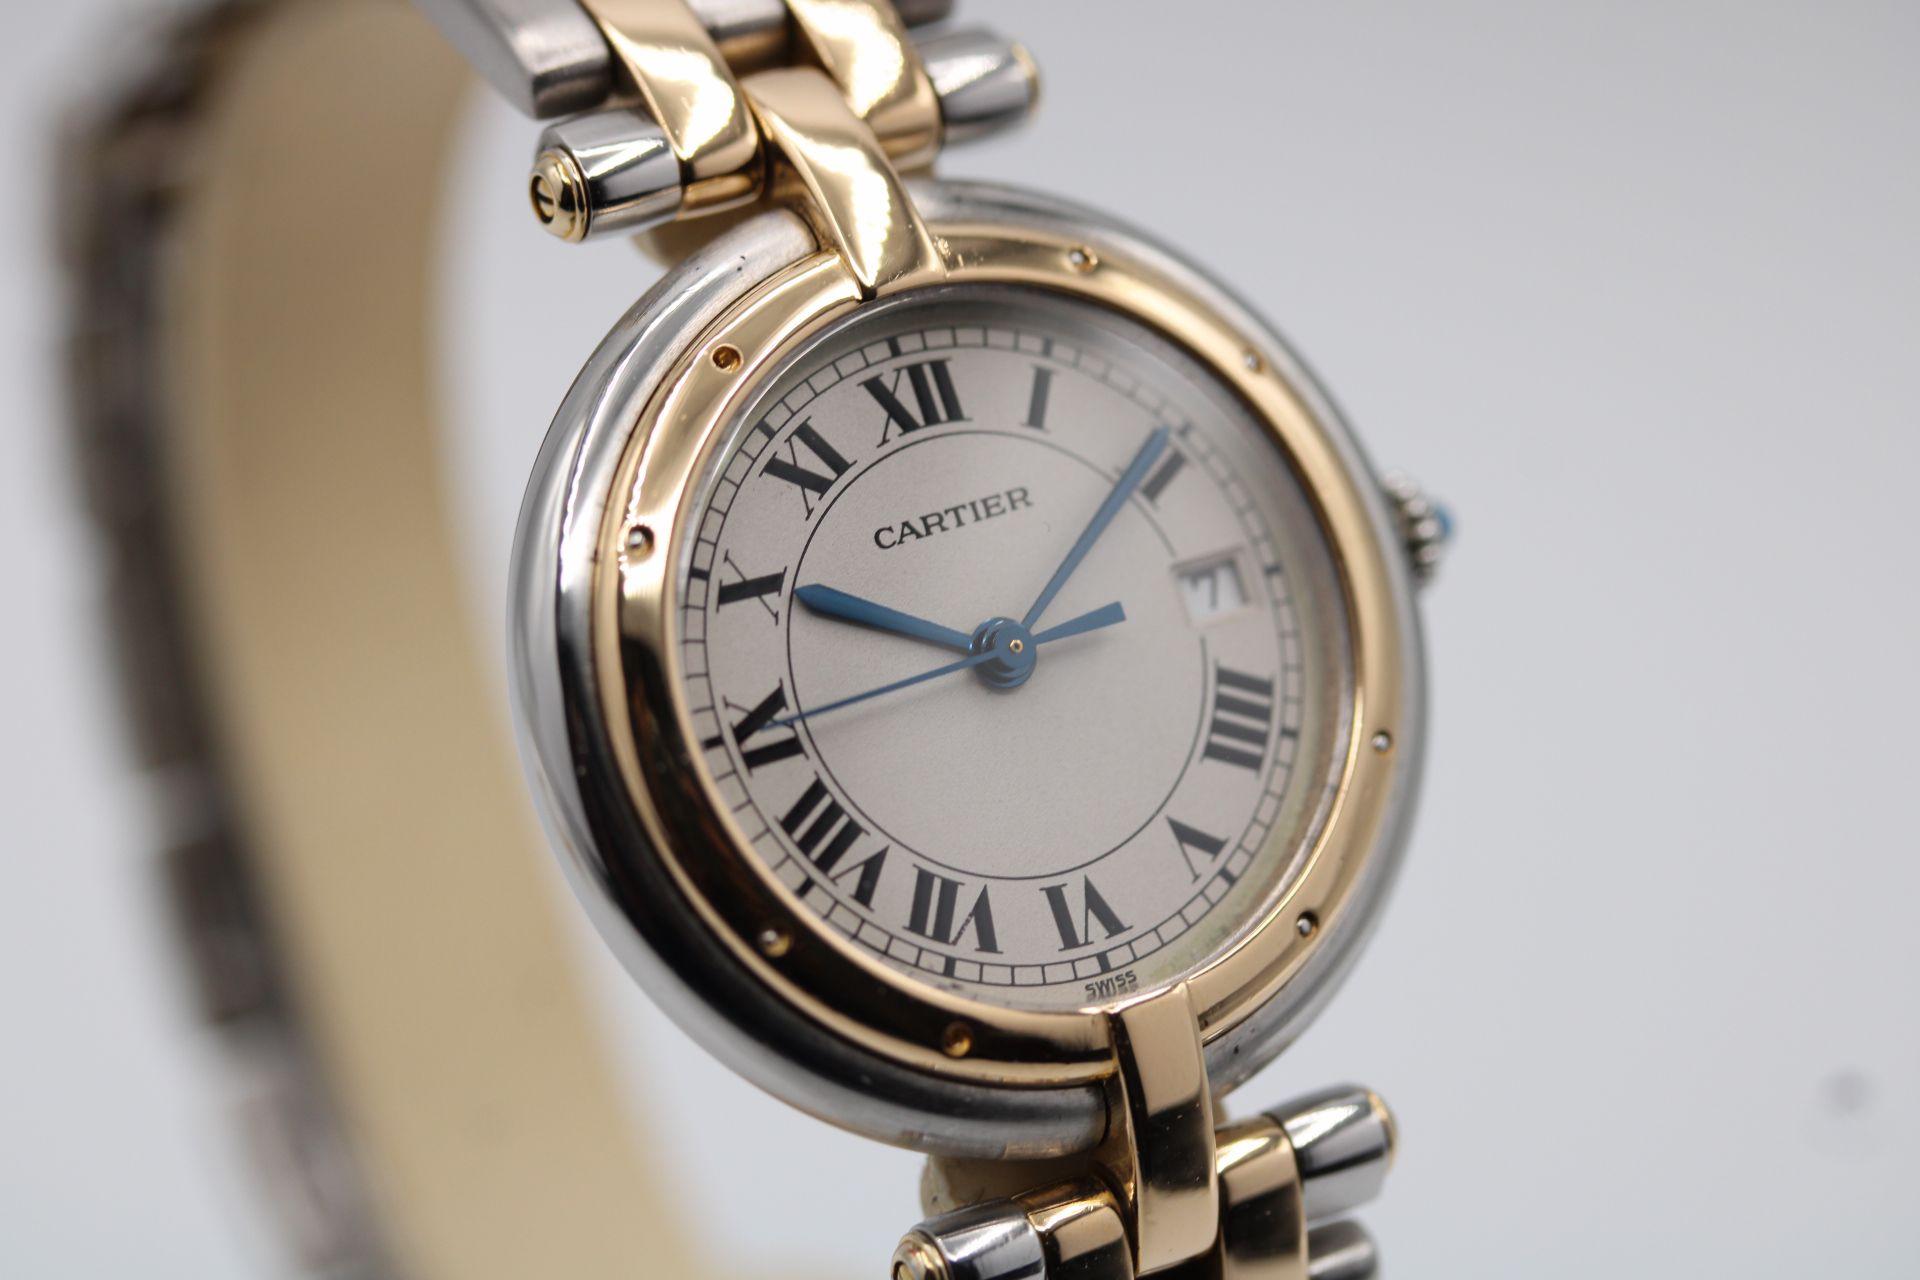 
We have given this a complete service and a polish. The watch is presented with both inner and outer boxes, pouch, wallet, manuals and papers dated 1993.

This Cartier Cougar, model 183964, features a 30mm stainless steel case, fixed gold bezel,